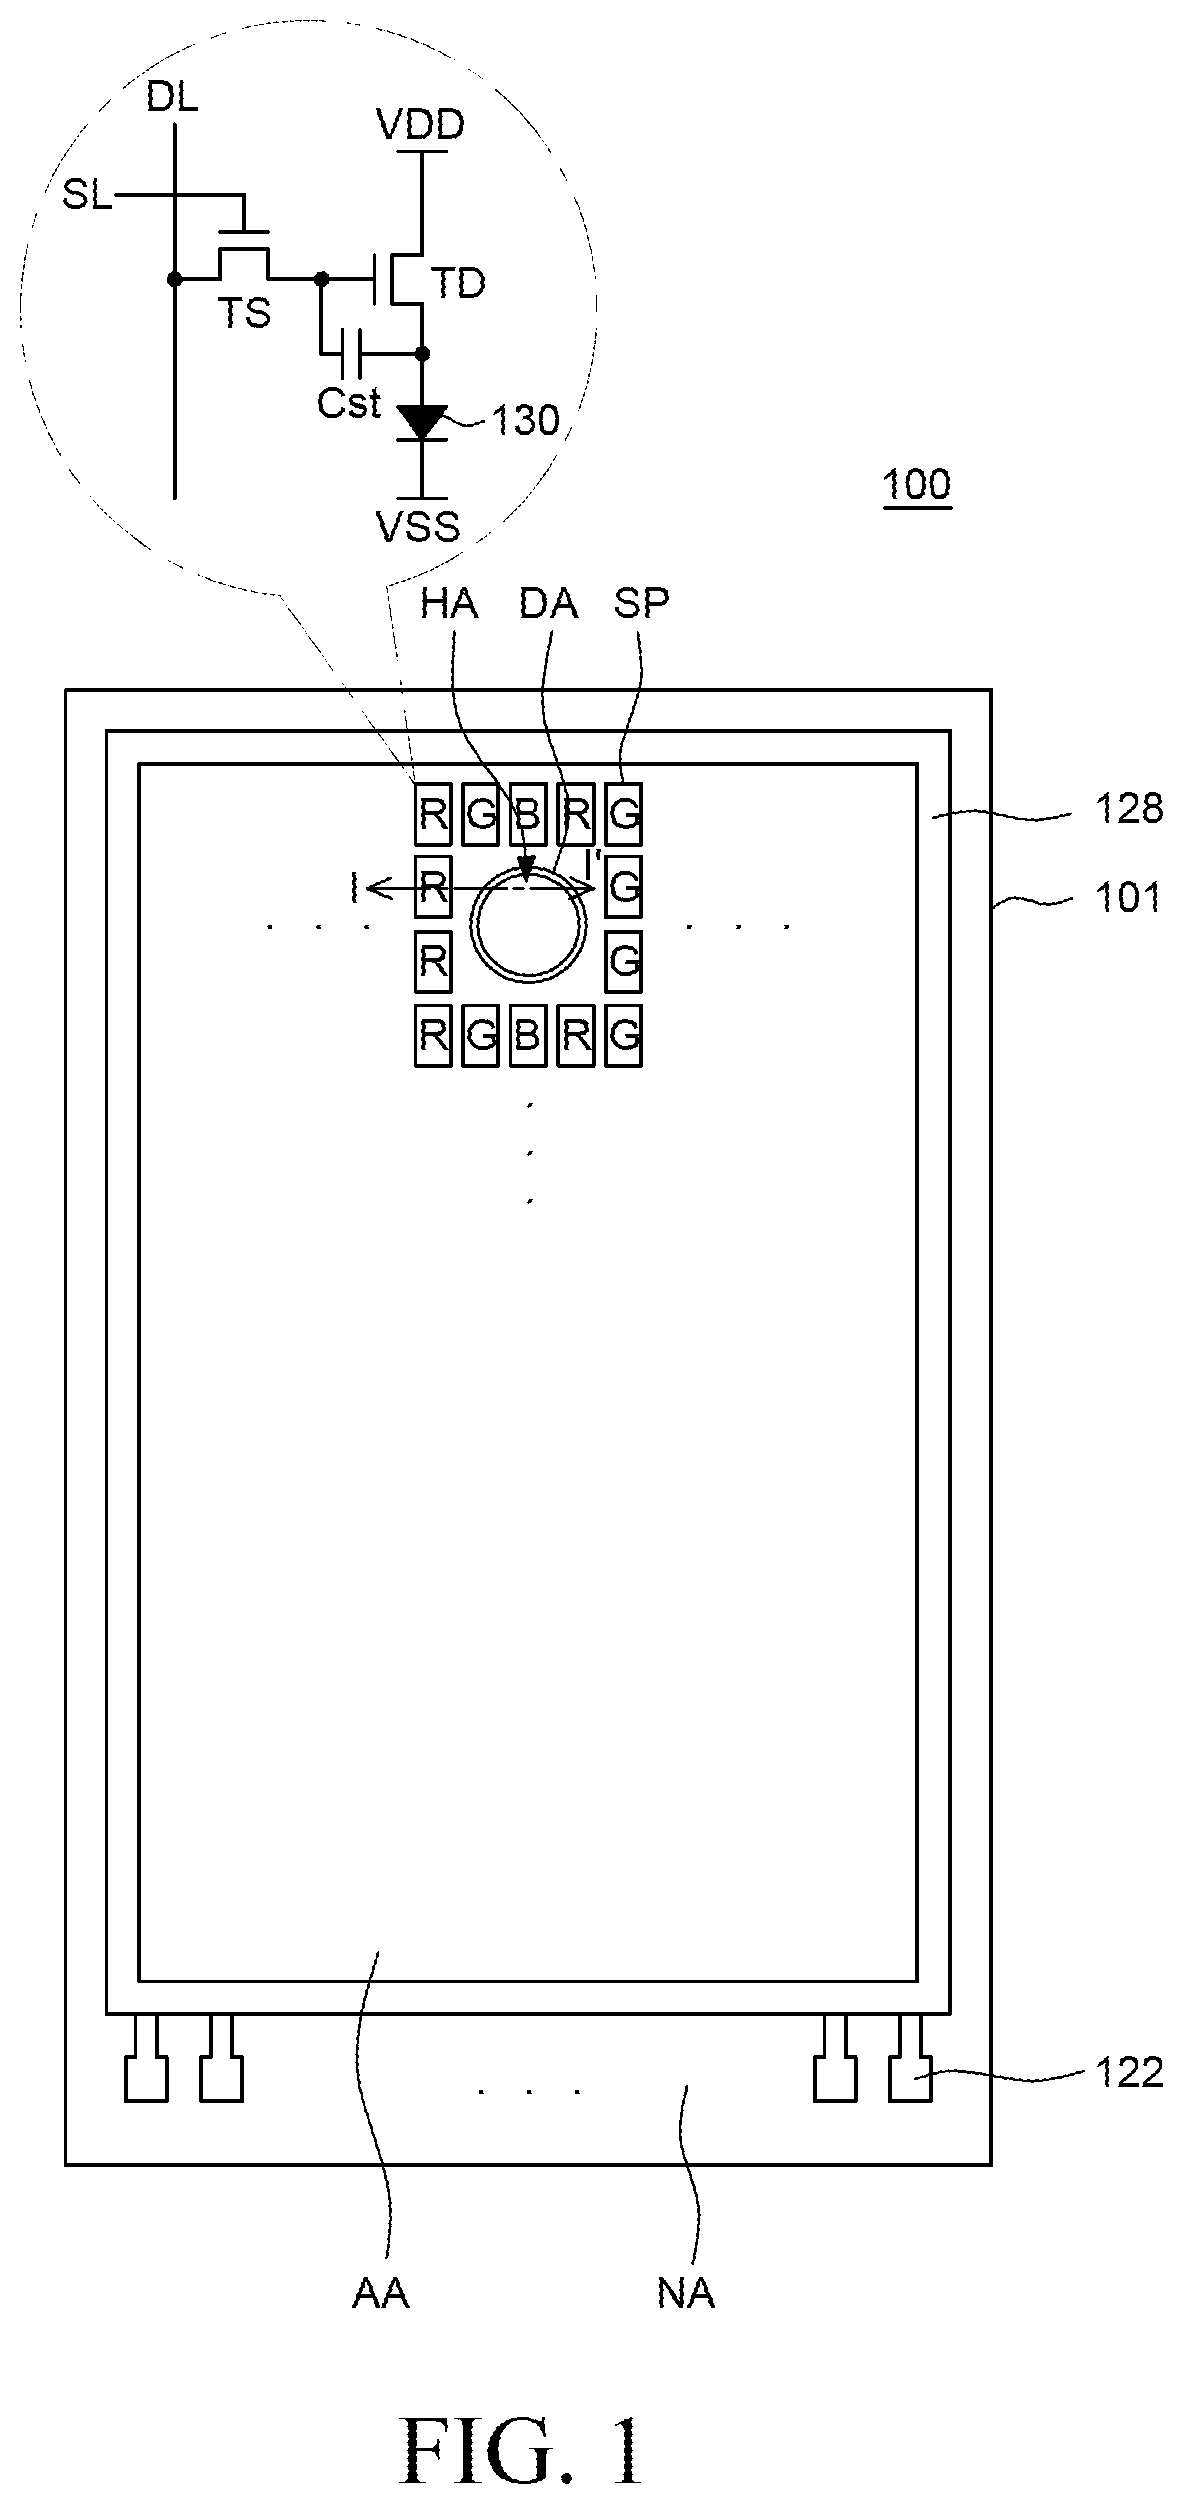 Display device including see-through area for camera